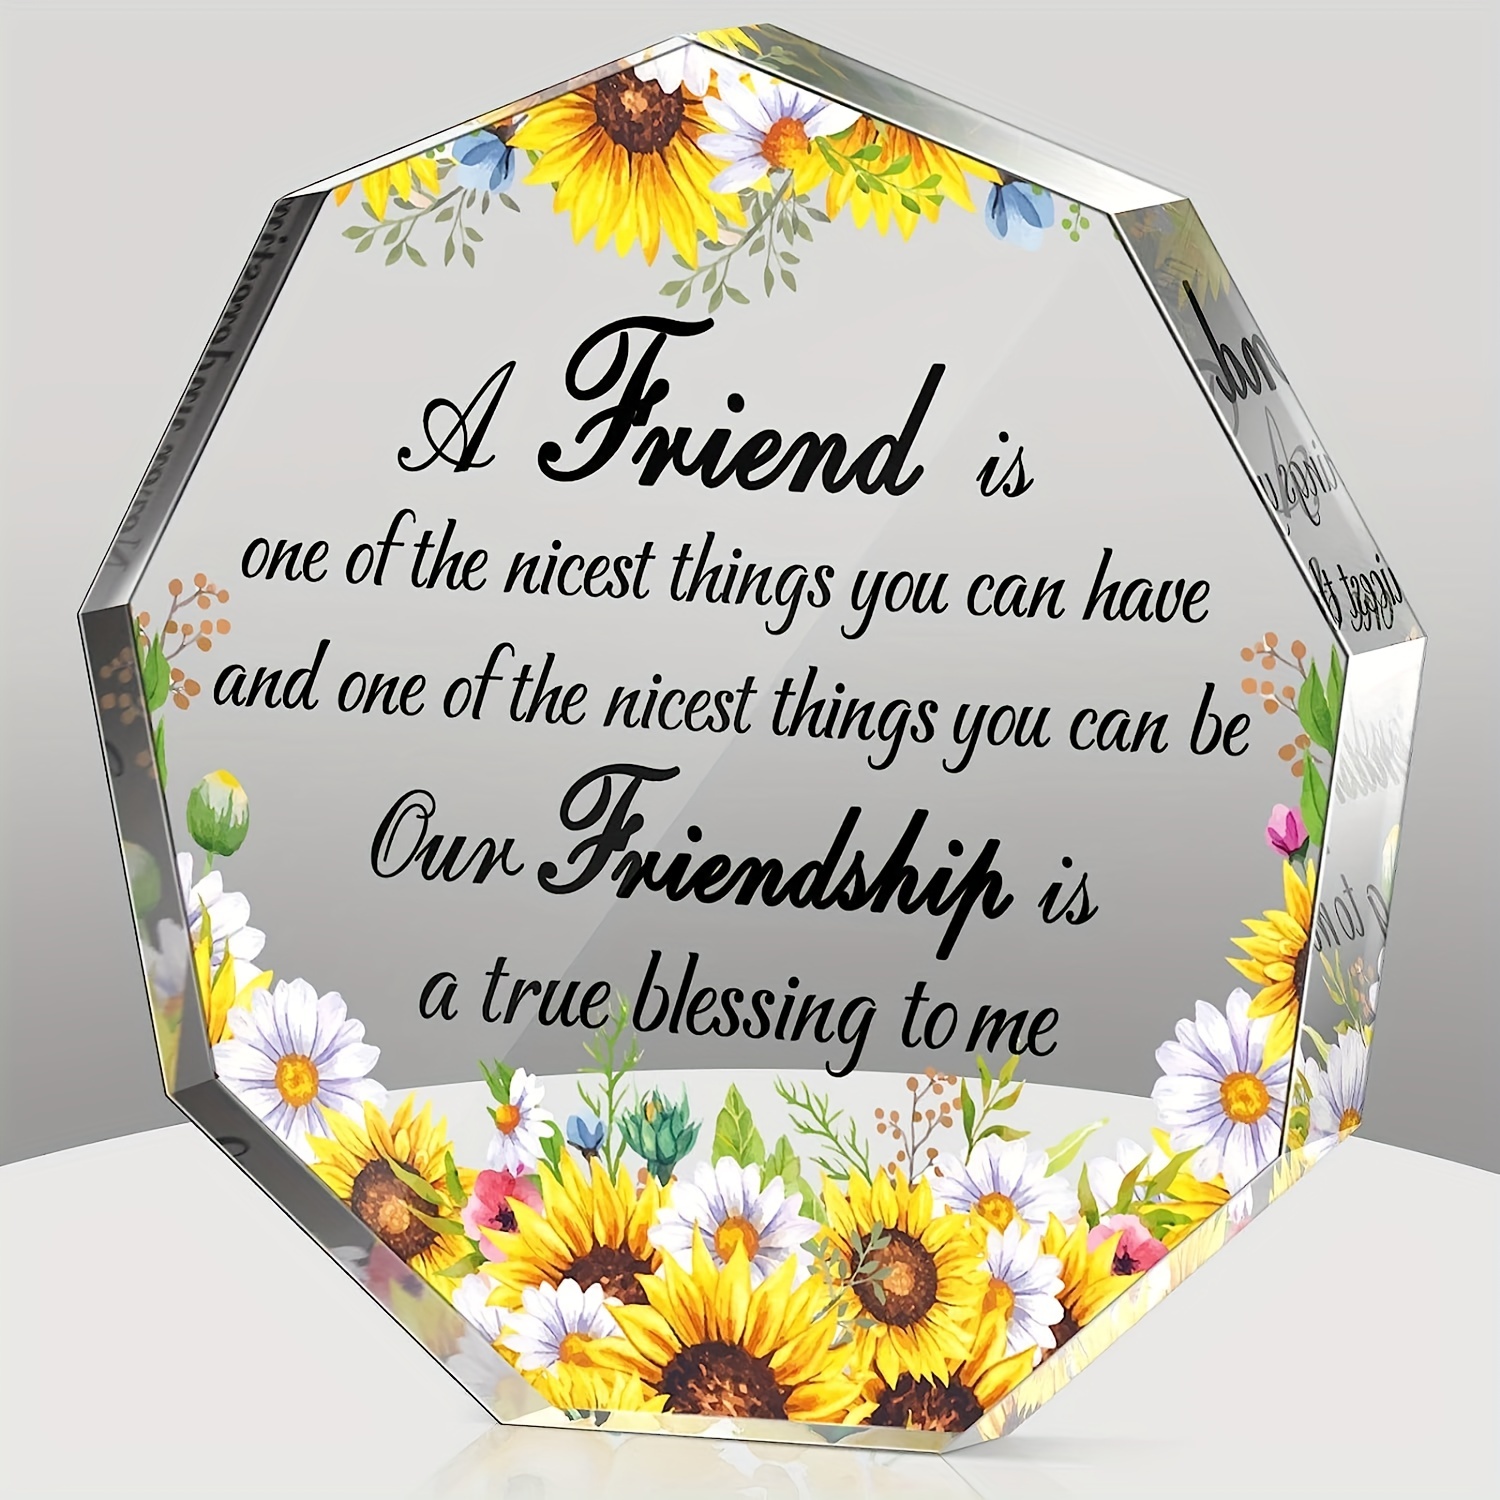 Creoate Friendship Gifts for Women Warming Friend Sister Gift